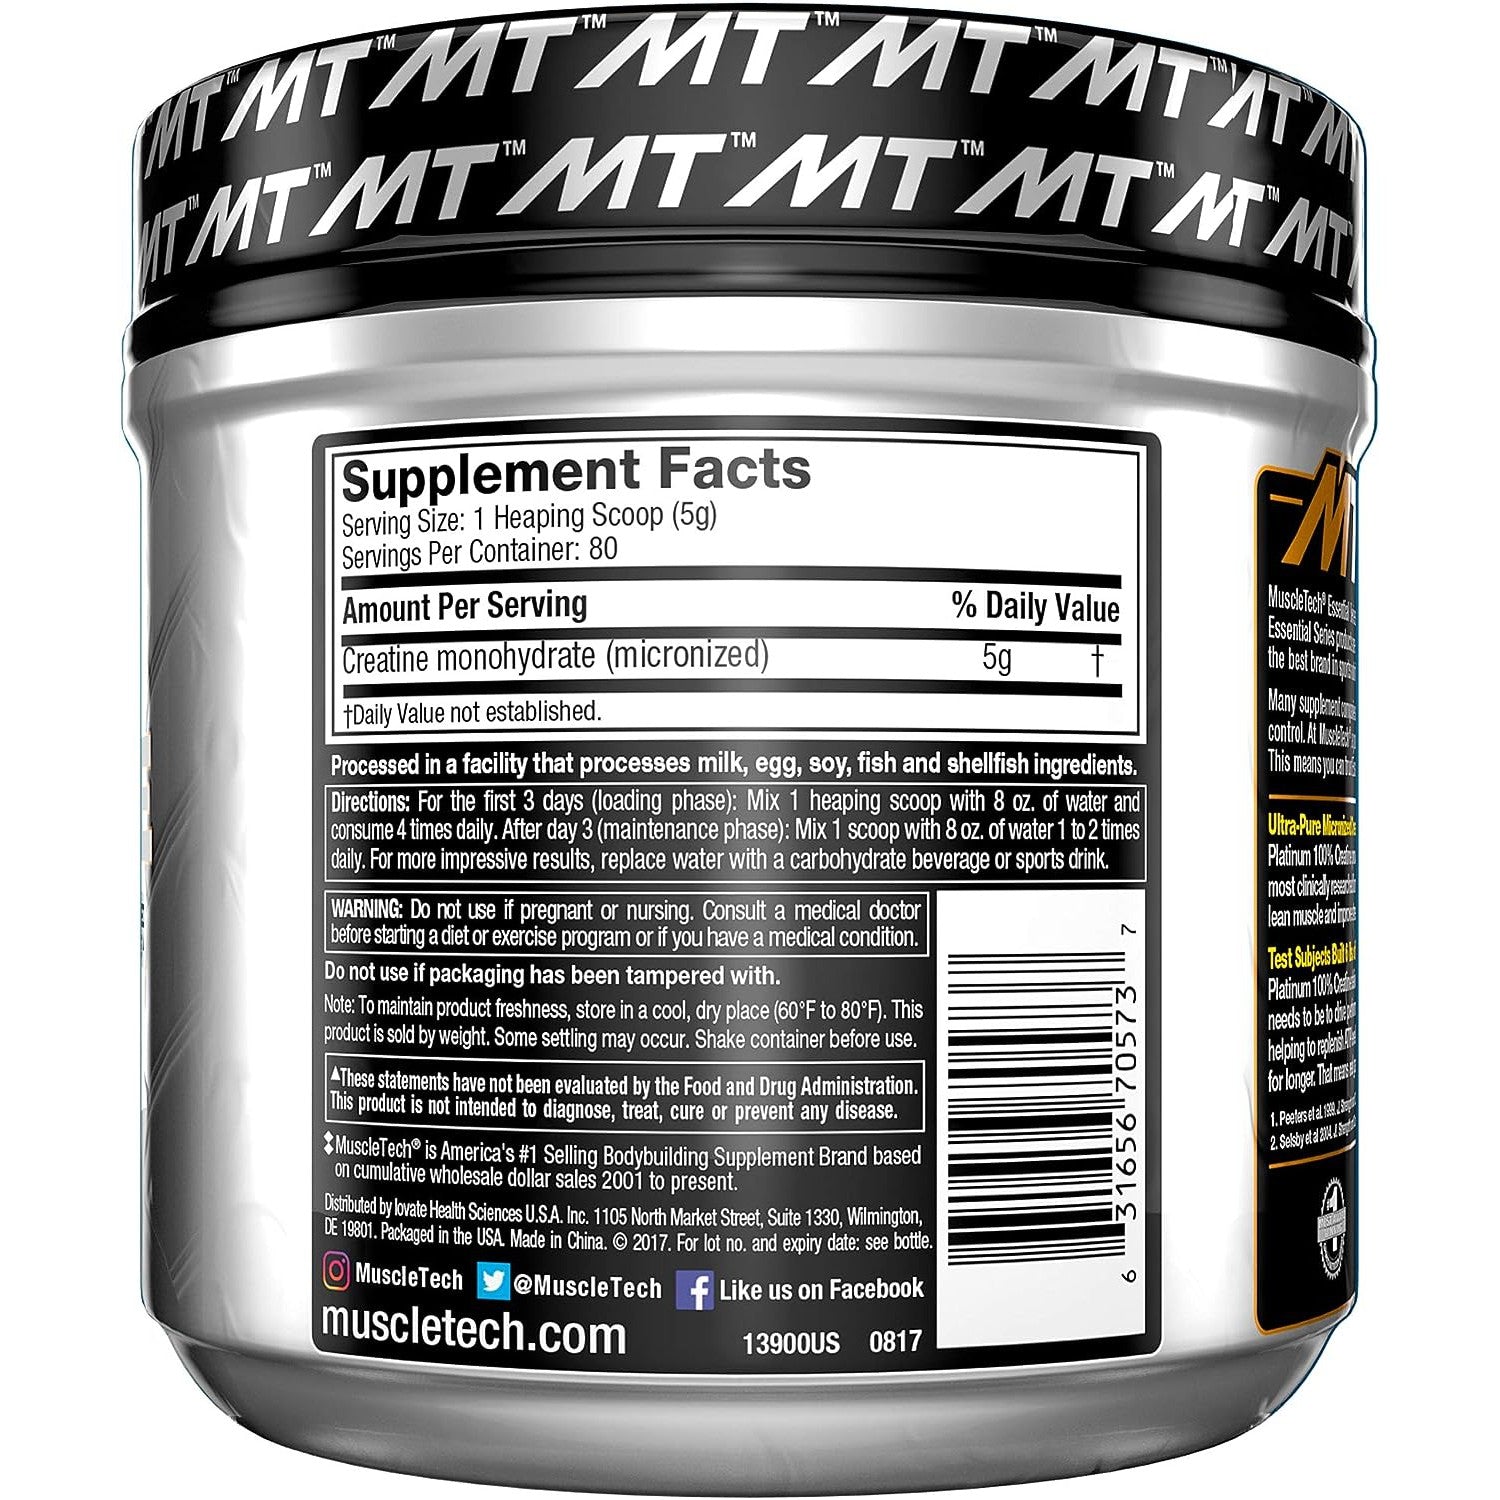 MuscleTech Platinum Creatine Monohydrate Powder | Pure Micronized | Muscle Recovery + Builder for Men & Women | Unflavored 400g